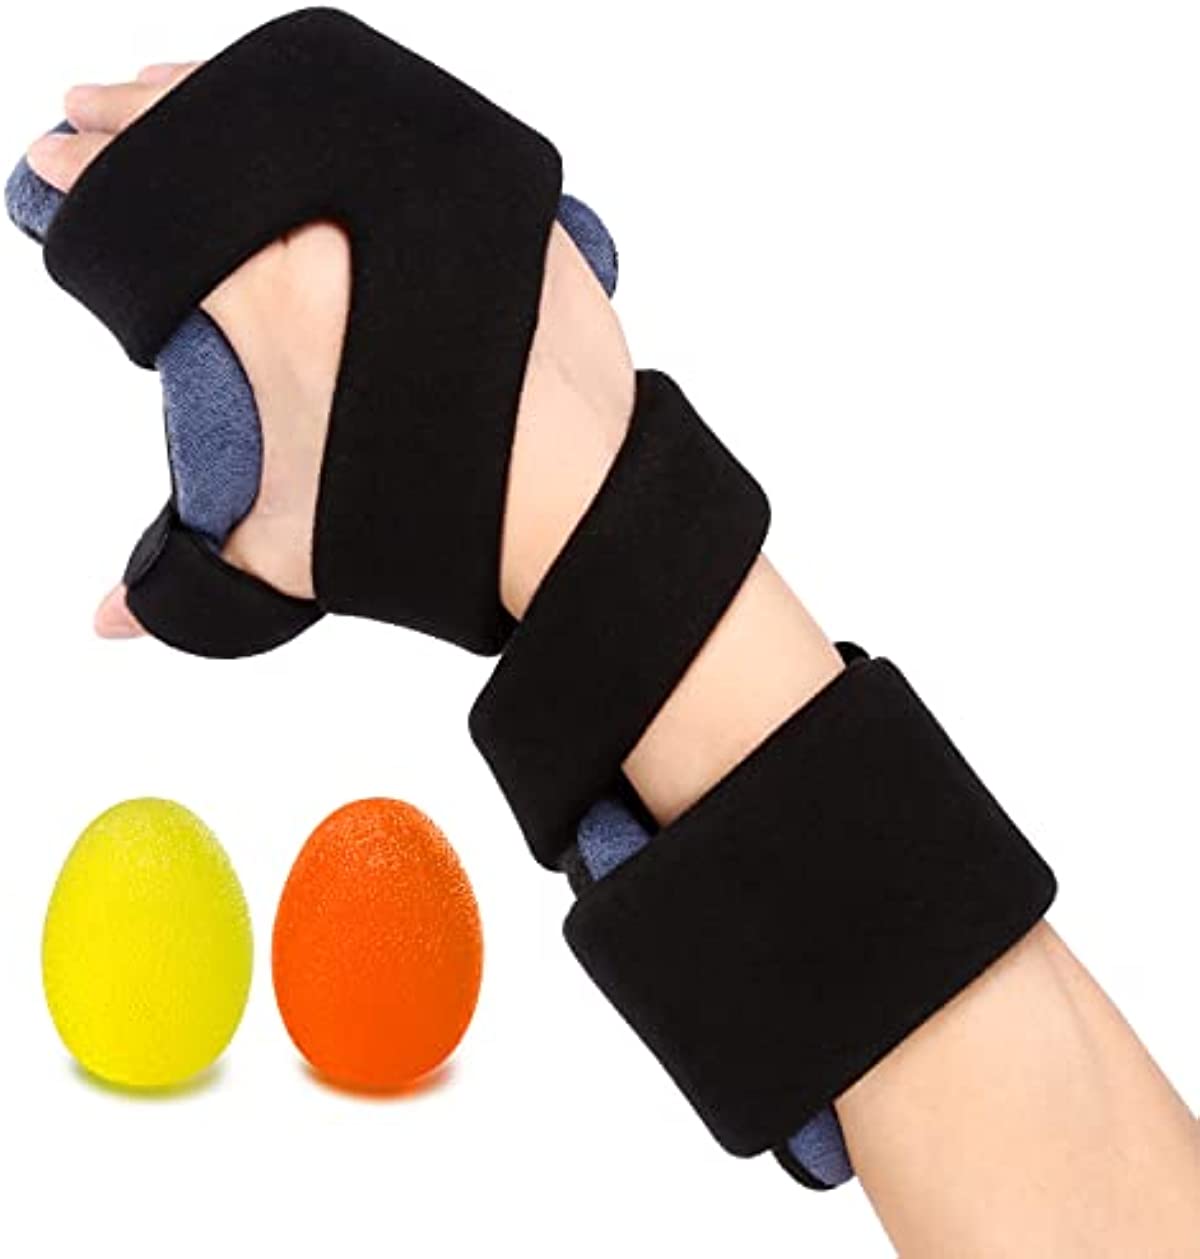 VELPEAU Stroke Resting Hand Splint - Night Immobilizer Wrist Brace with Finger Support - Thumb Stabilizer Wrap - For Muscle Atrophy Rehabilitation, Arthritis, Tendonitis, Carpal Tunnel Pain (Left-M)